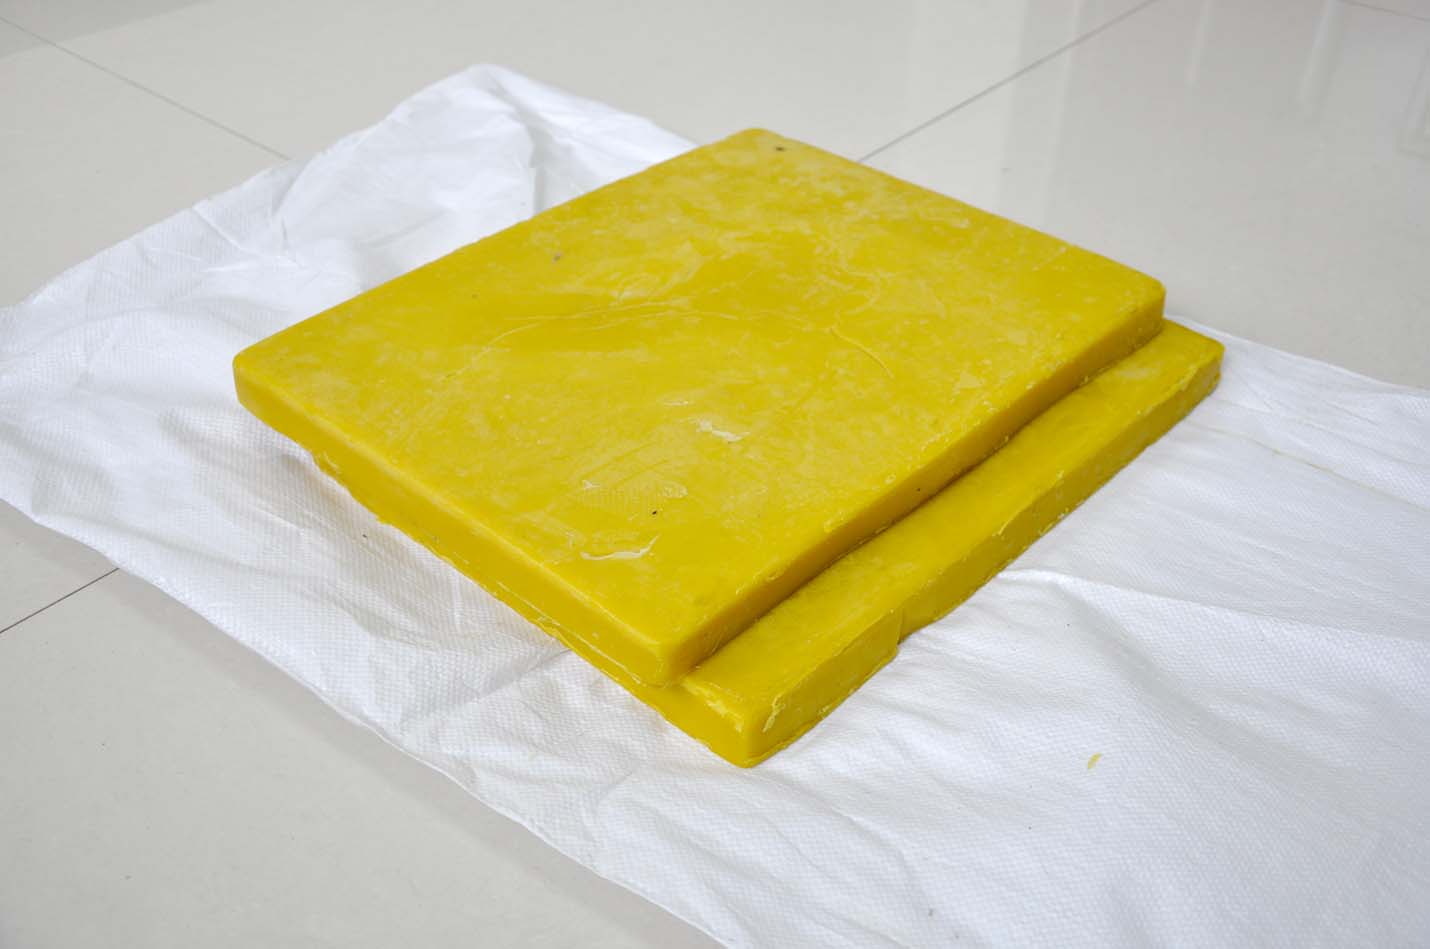 beeswax from manufacture